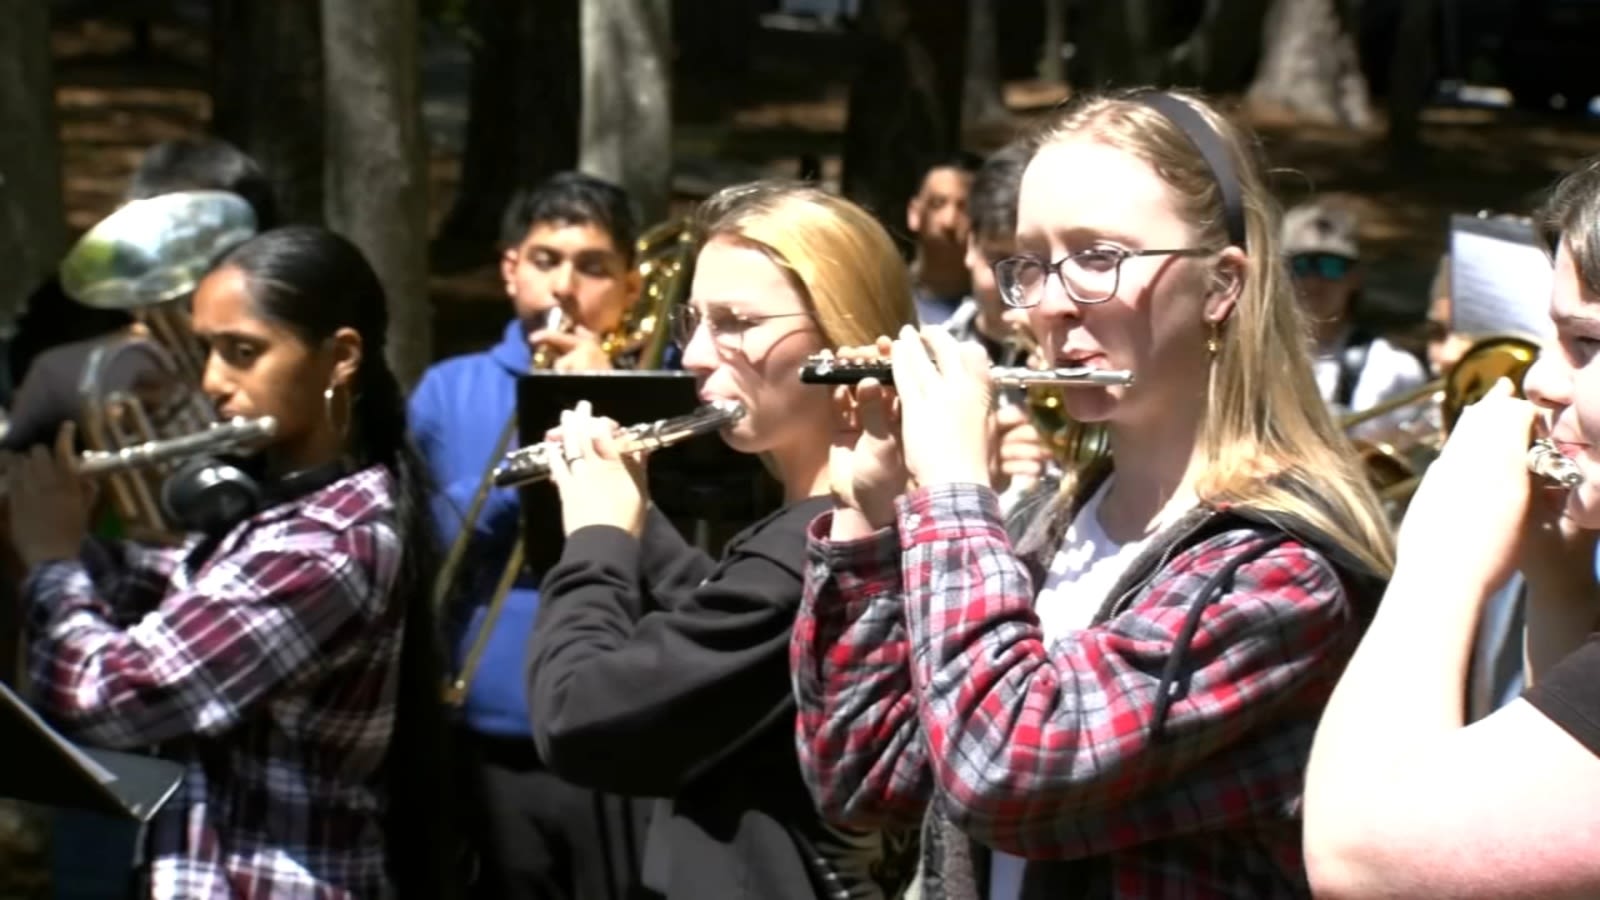 Athens Drive HS Marching Band perform at Busch Gardens Williamburg: 'Means so much to me'